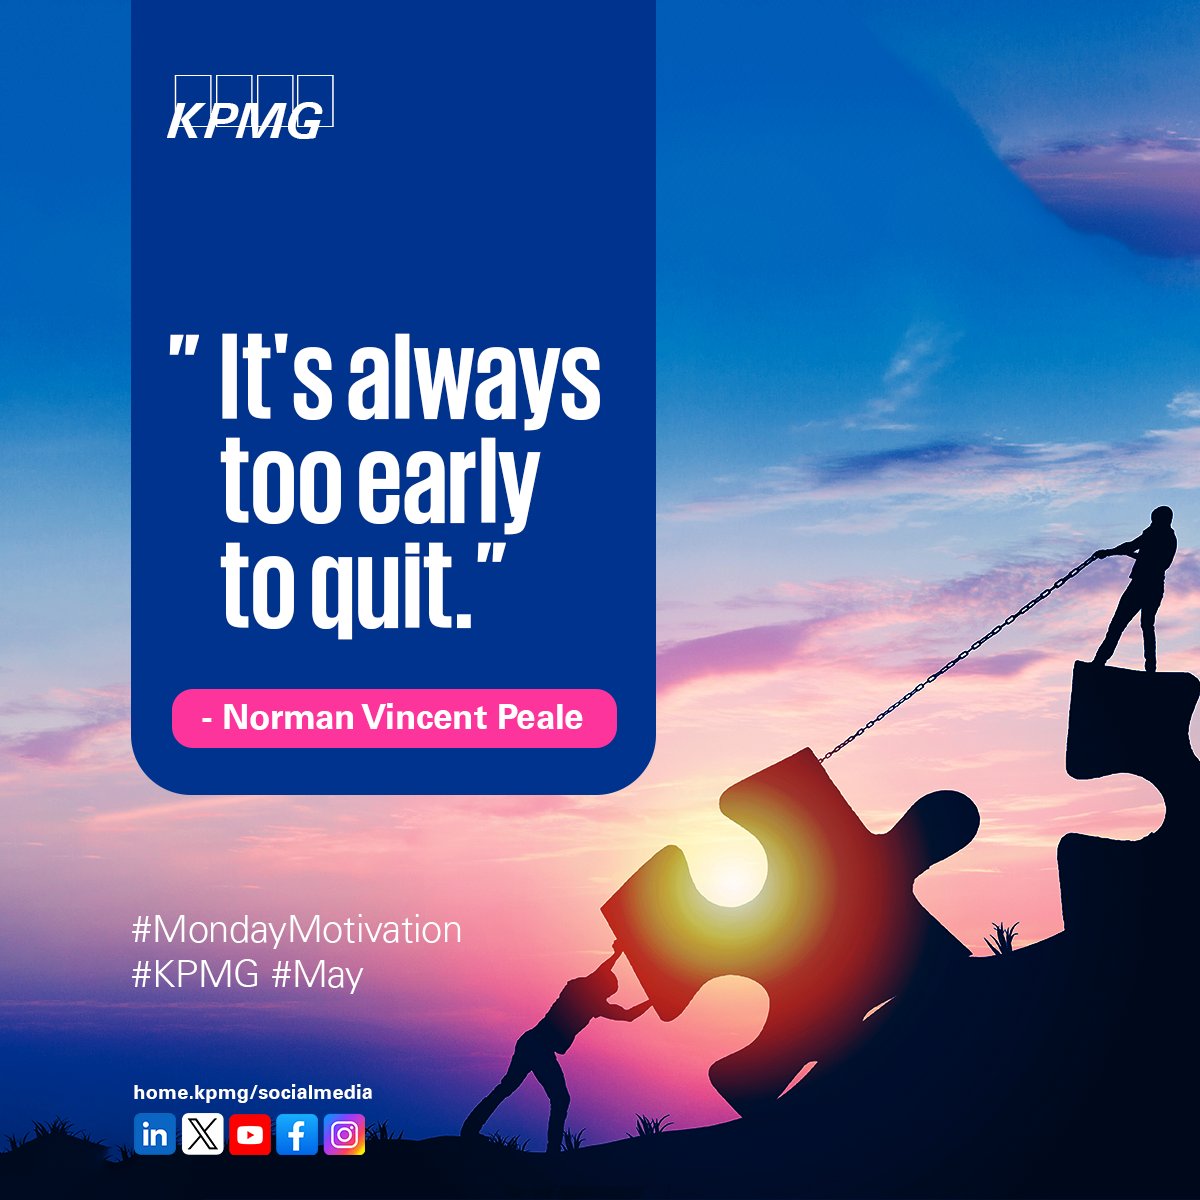 #MondayMotivation, “It’s always too early to quit.” – Norman Vincent Peale #MondayMotivation #KPMG #May